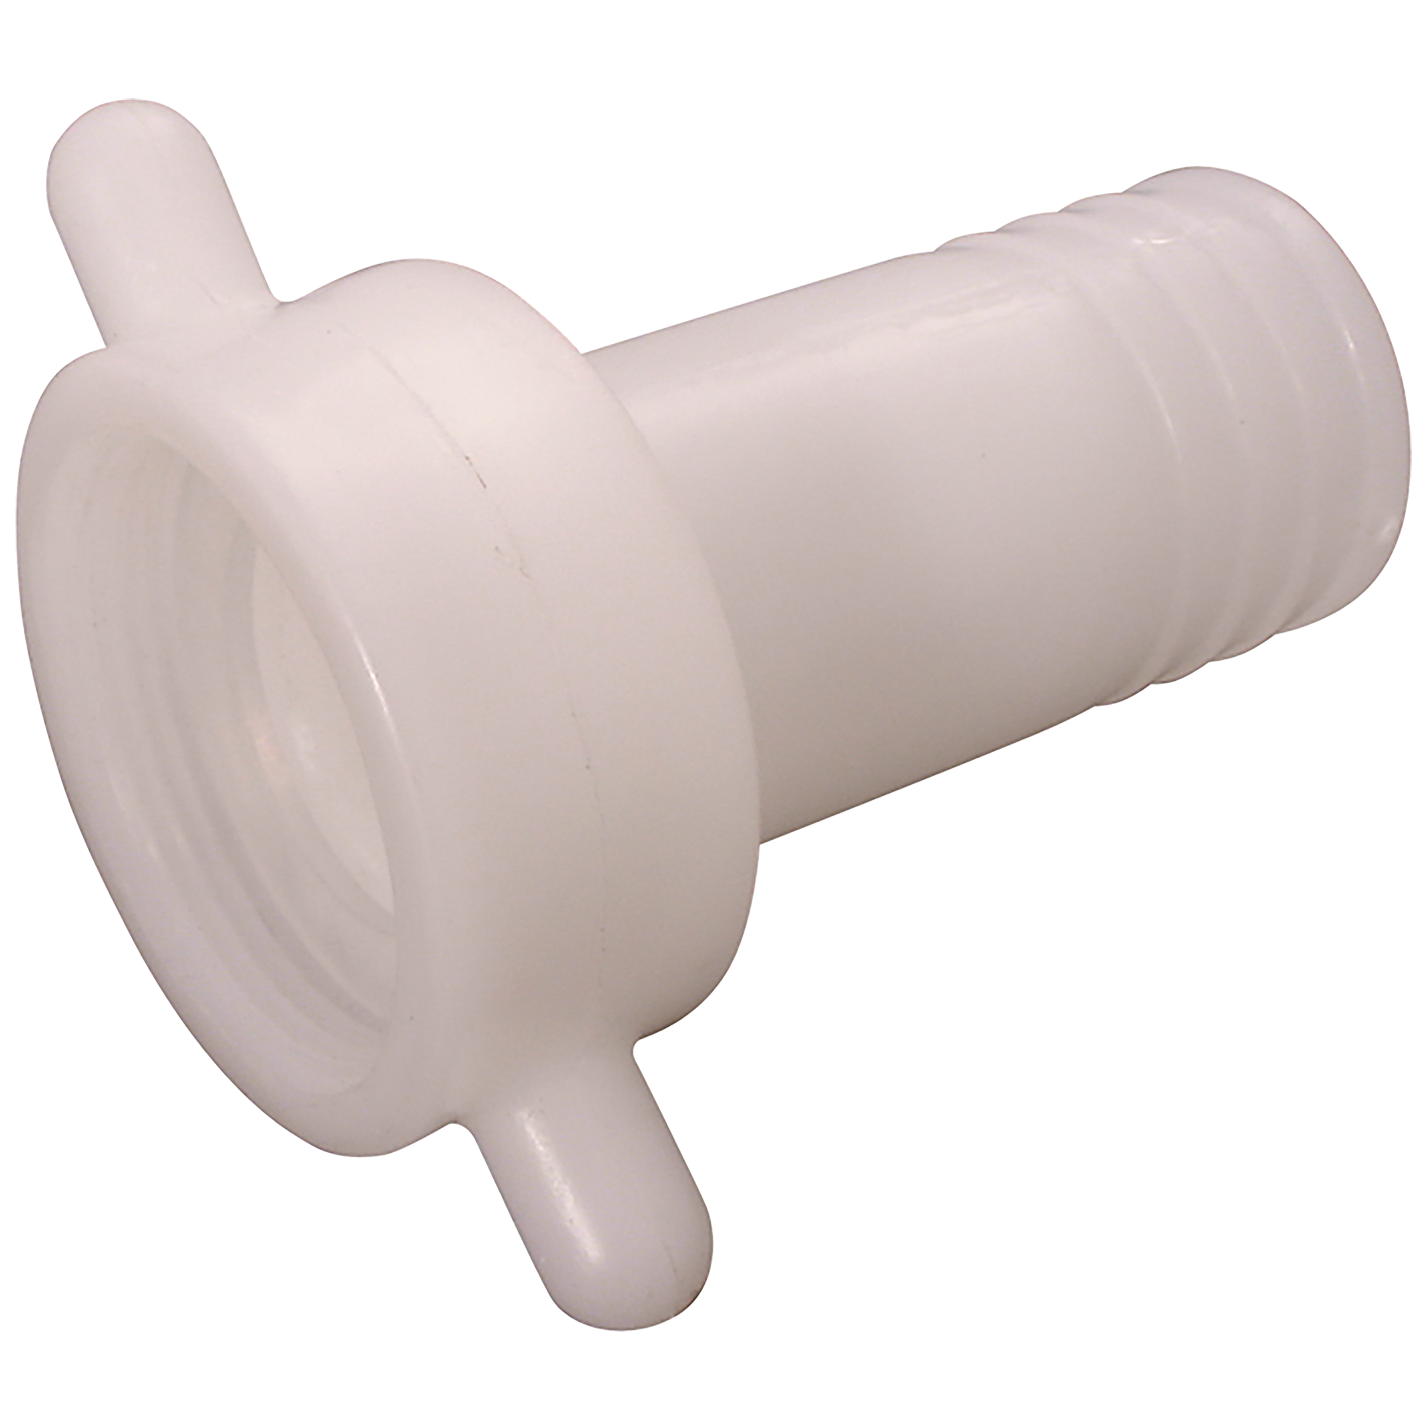 2.1/2" BSPP POLY CAP AND TAIL AND WASHER